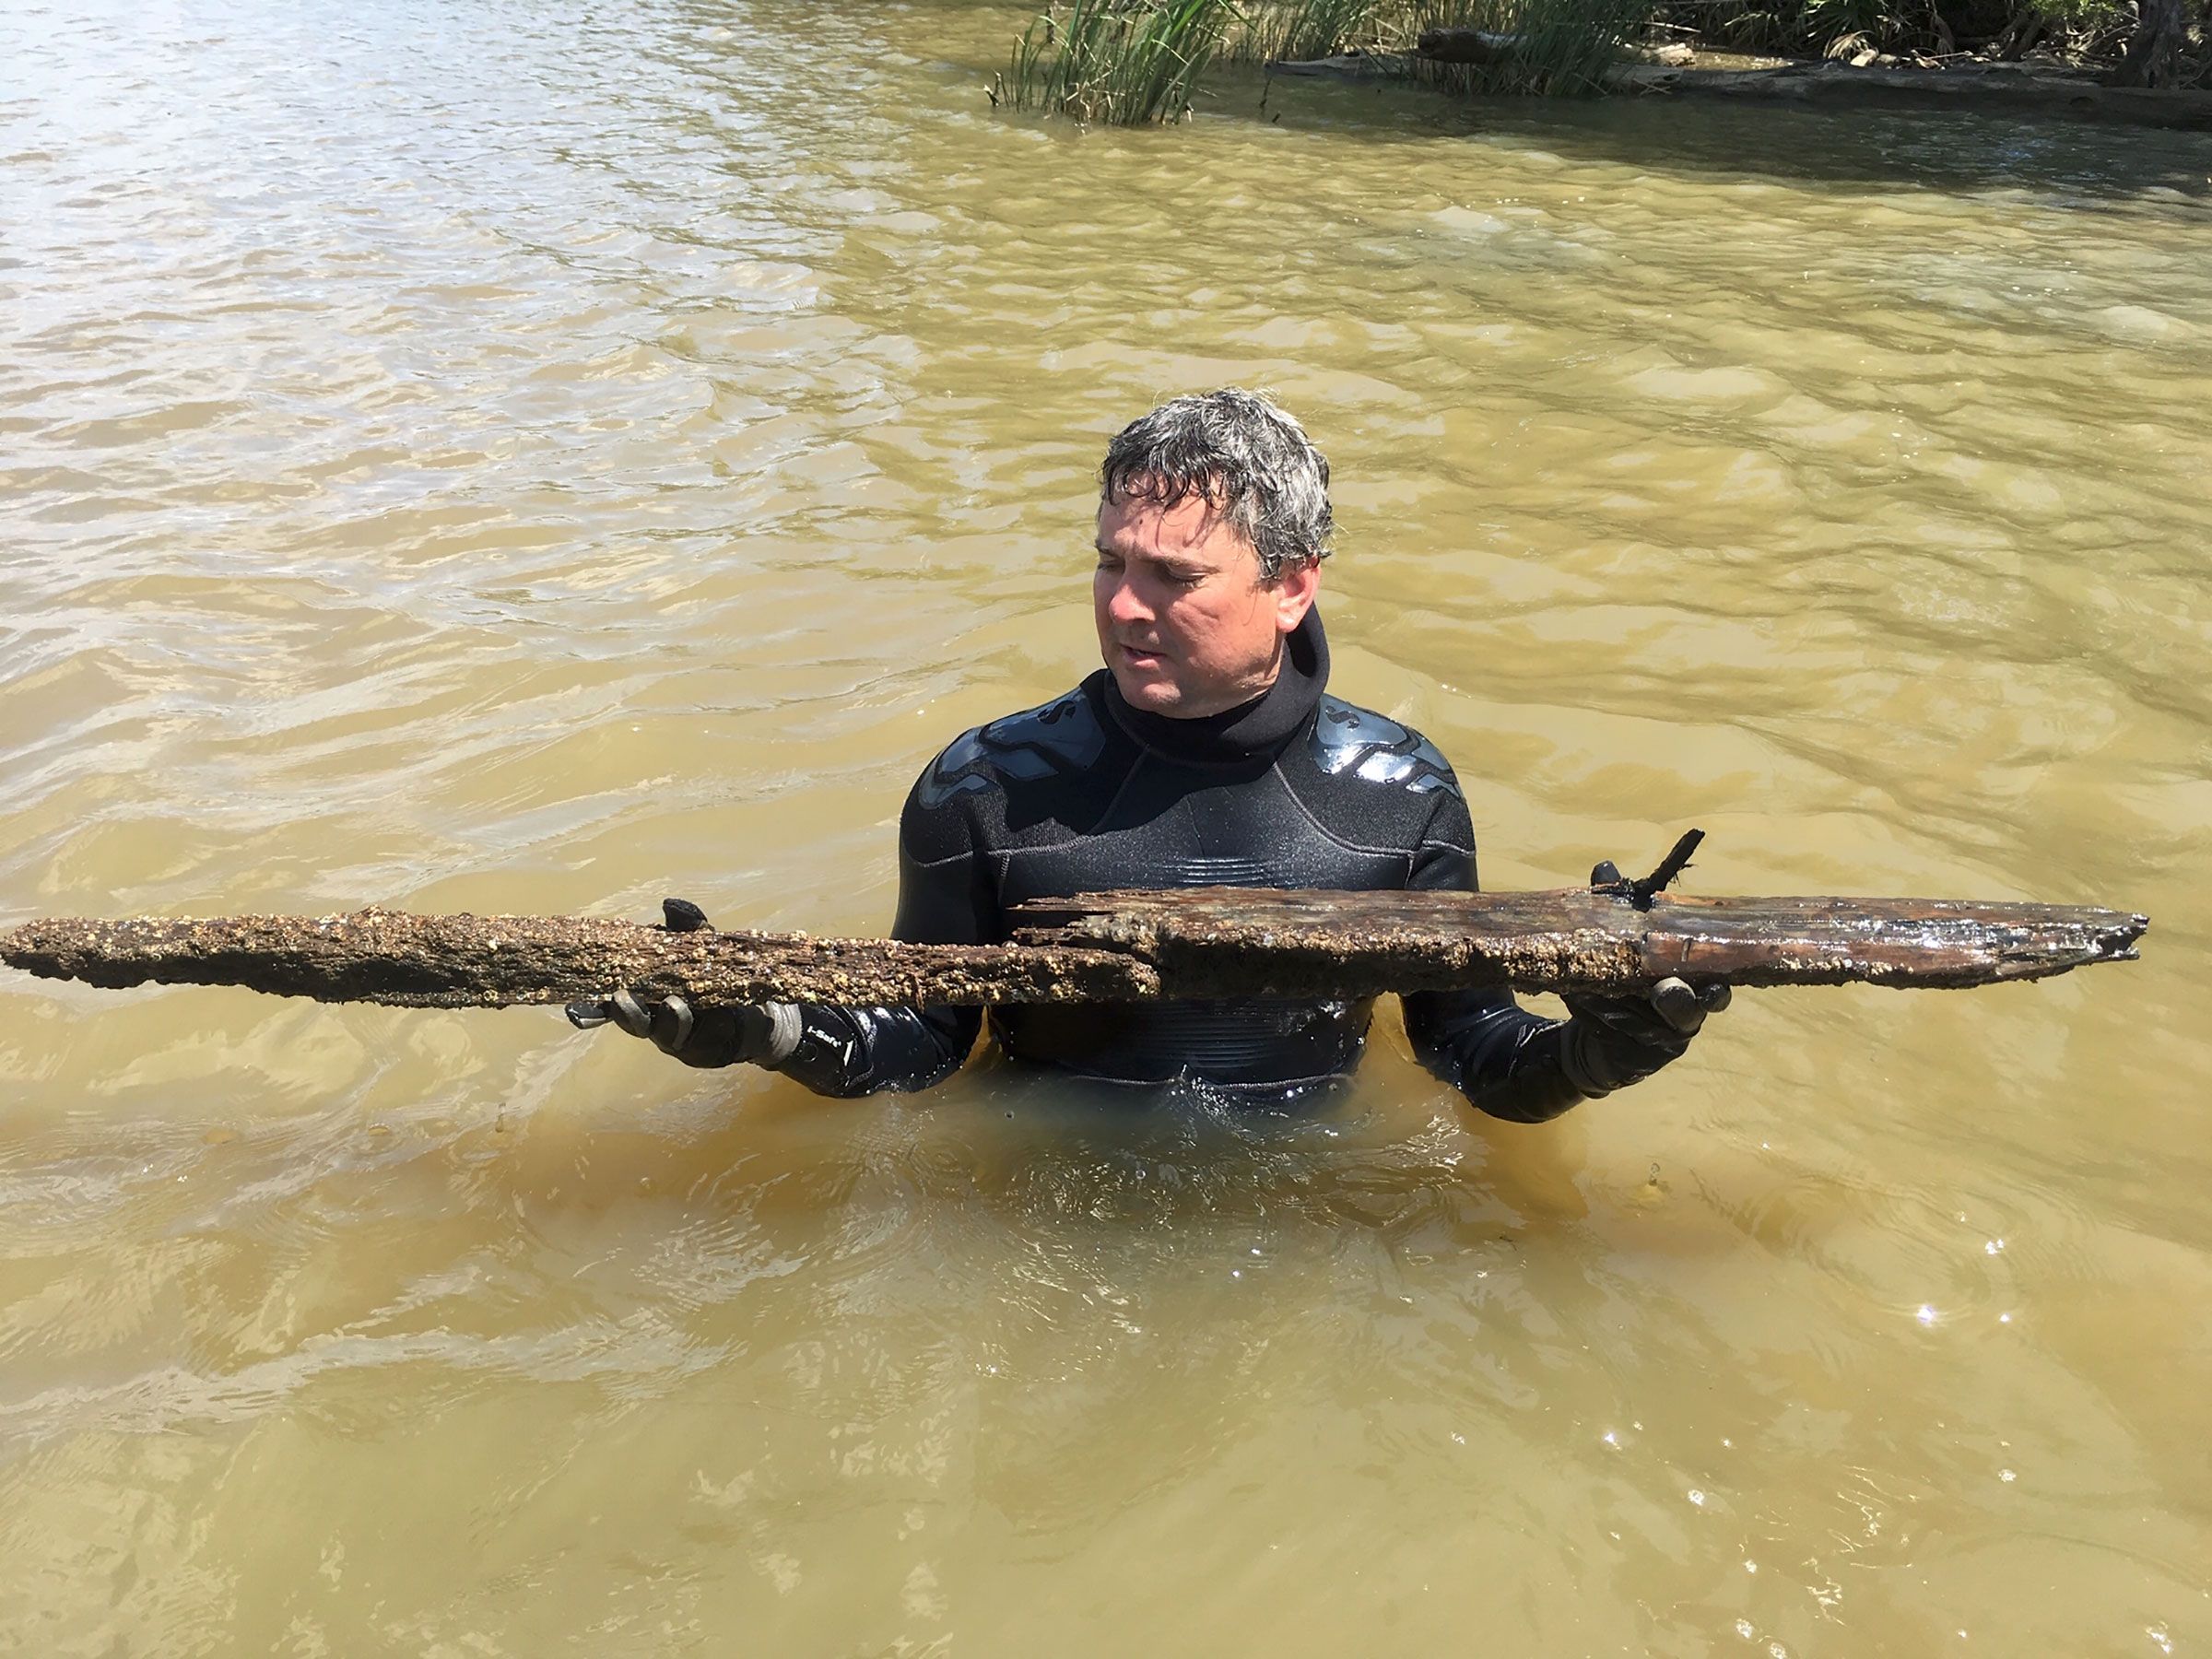 Ben Raines holds a piece of the Clotilda after Raines and a team from the University of Southern Mississippi discovered the wreck, April 2018. (Courtesy Joe Turner)